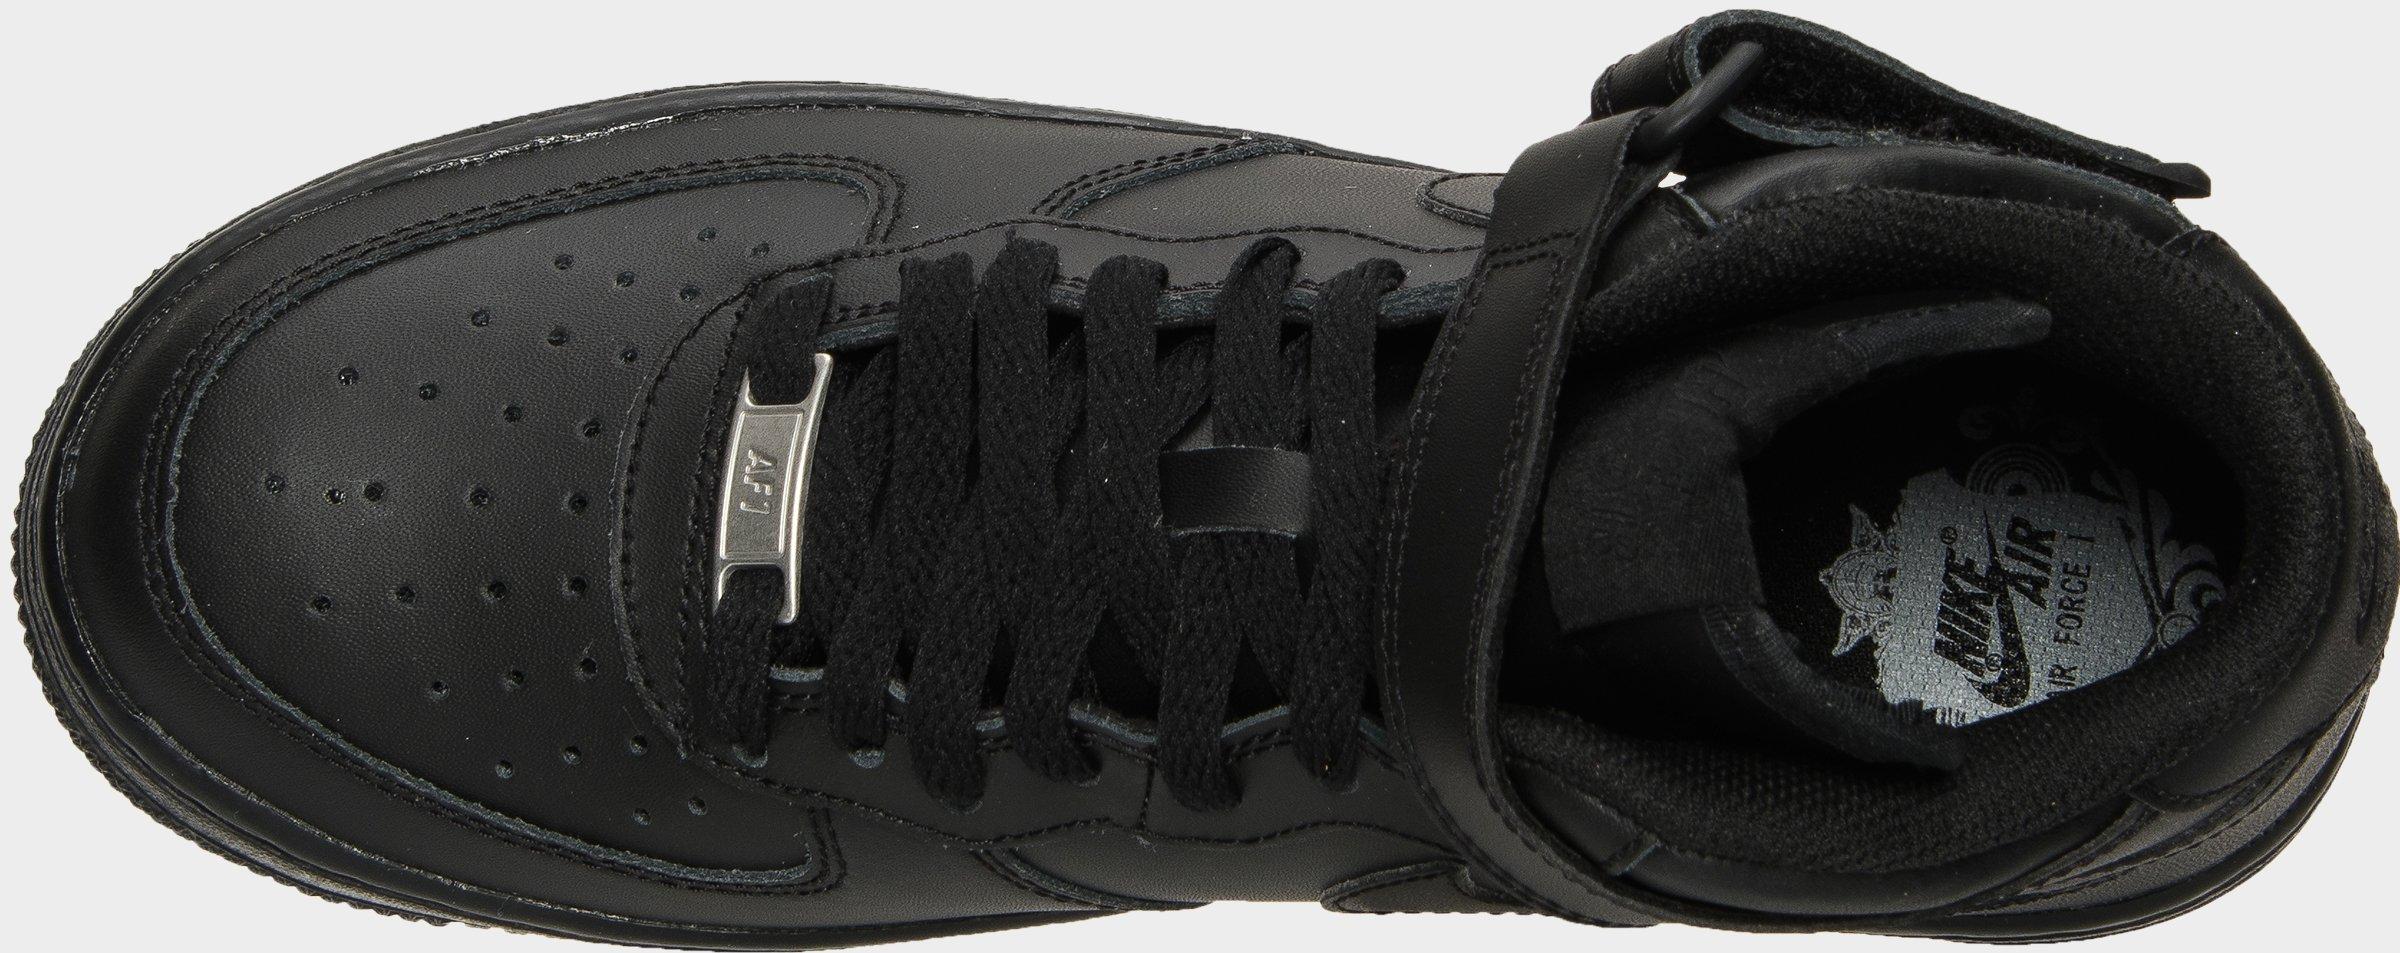 air force 1 all black mid